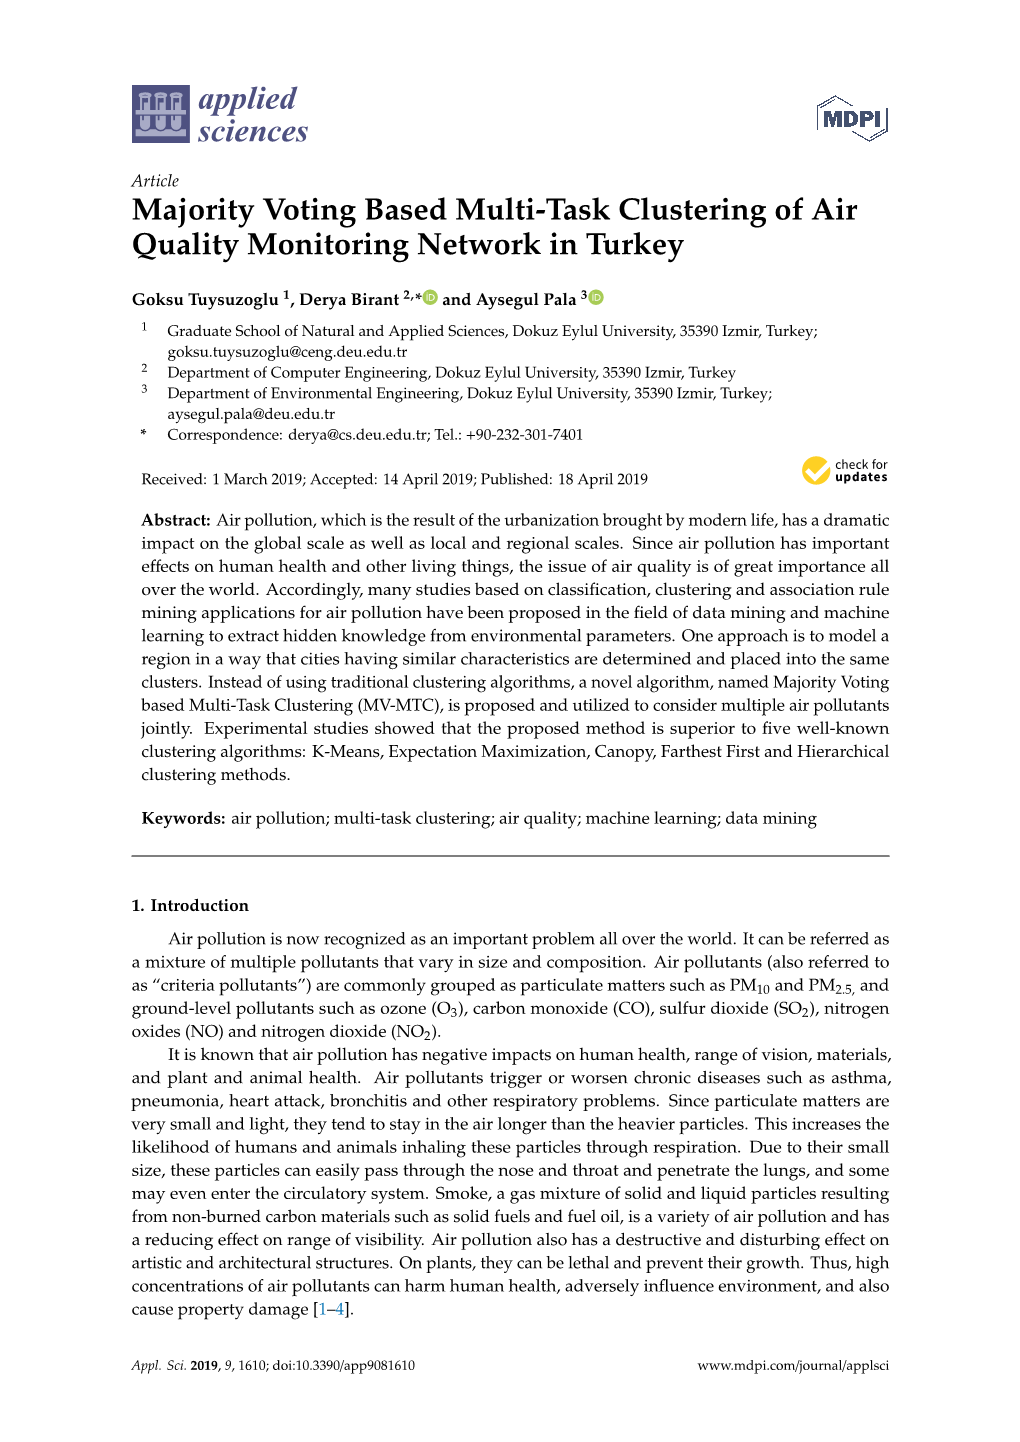 Majority Voting Based Multi-Task Clustering of Air Quality Monitoring Network in Turkey